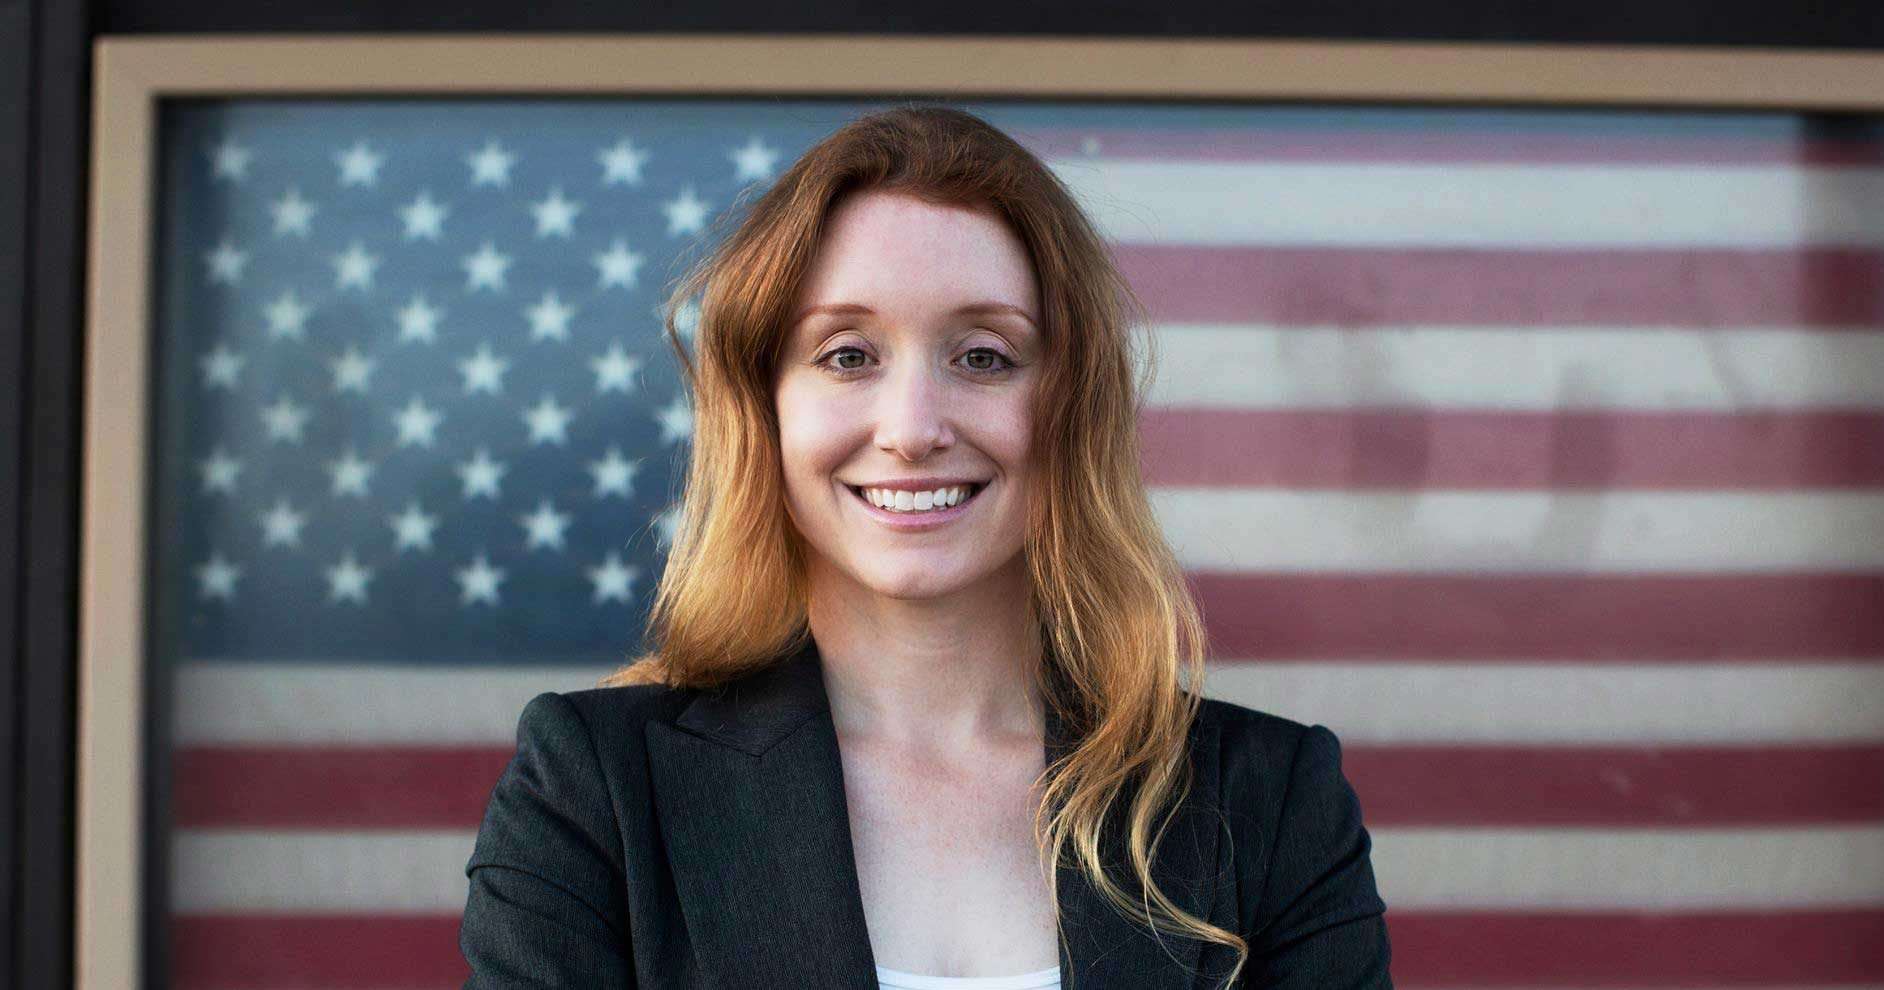 image for This Scientist Wants to Bring Star Trek Values to Congress